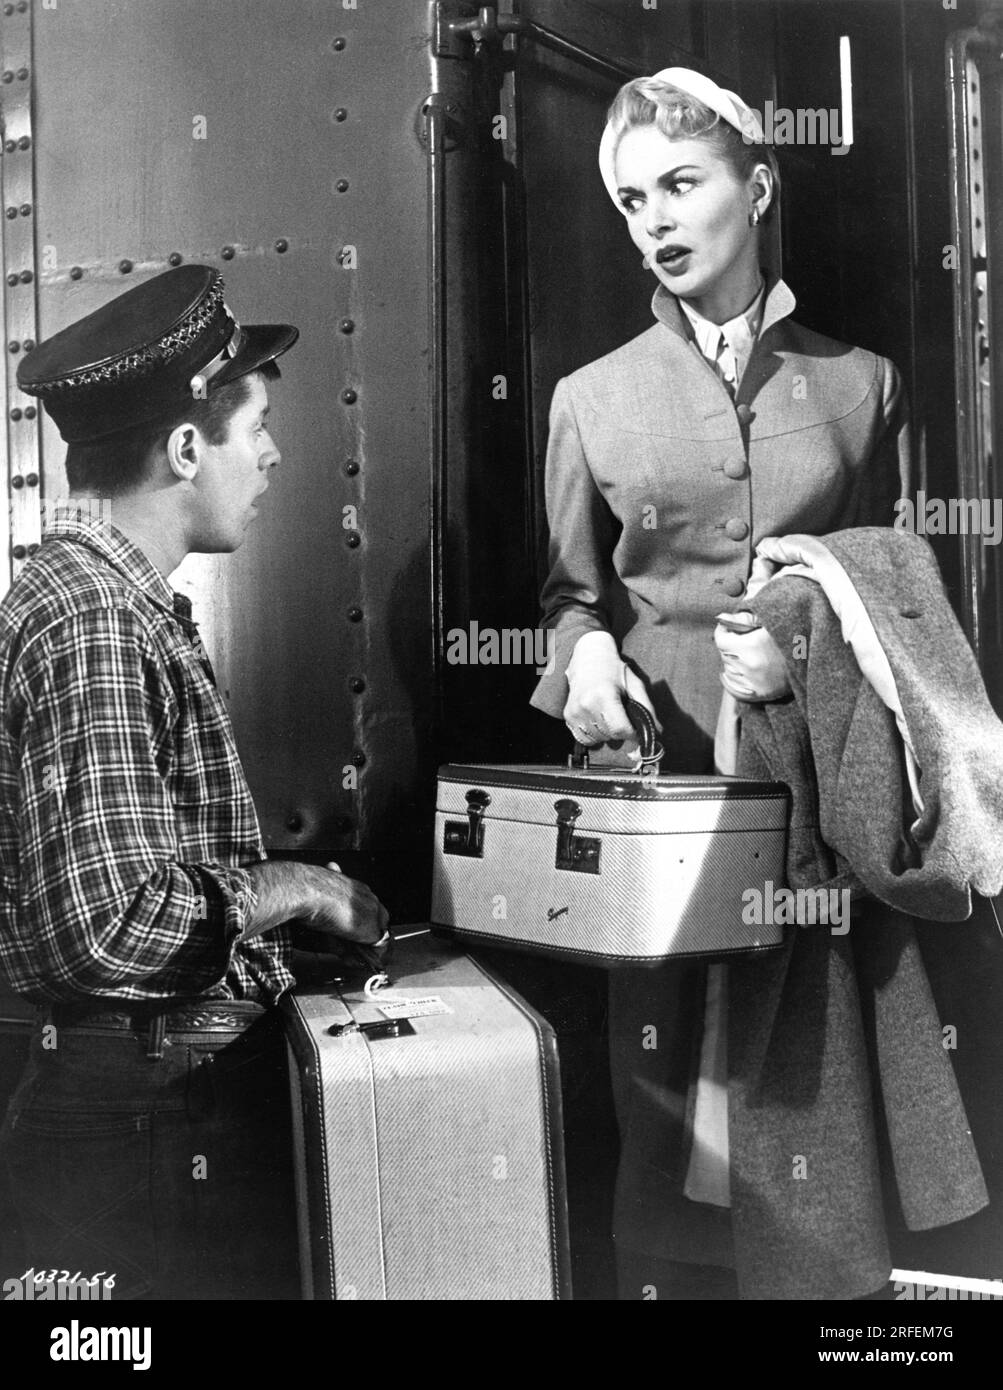 JERRY LEWIS as Homer Flagg and JANET LEIGH as Wally Cook in LIVING IT UP 1954 director NORMAN TAUROG play Ben Hecht story James Street screenplay Jack Rose and Melville Shavelson based on 1953 Broadway show Hazel Flagg based on the 1937 film Nothing Sacred gowns Edith Head York Pictures Corporation / Paramount Pictures Stock Photo